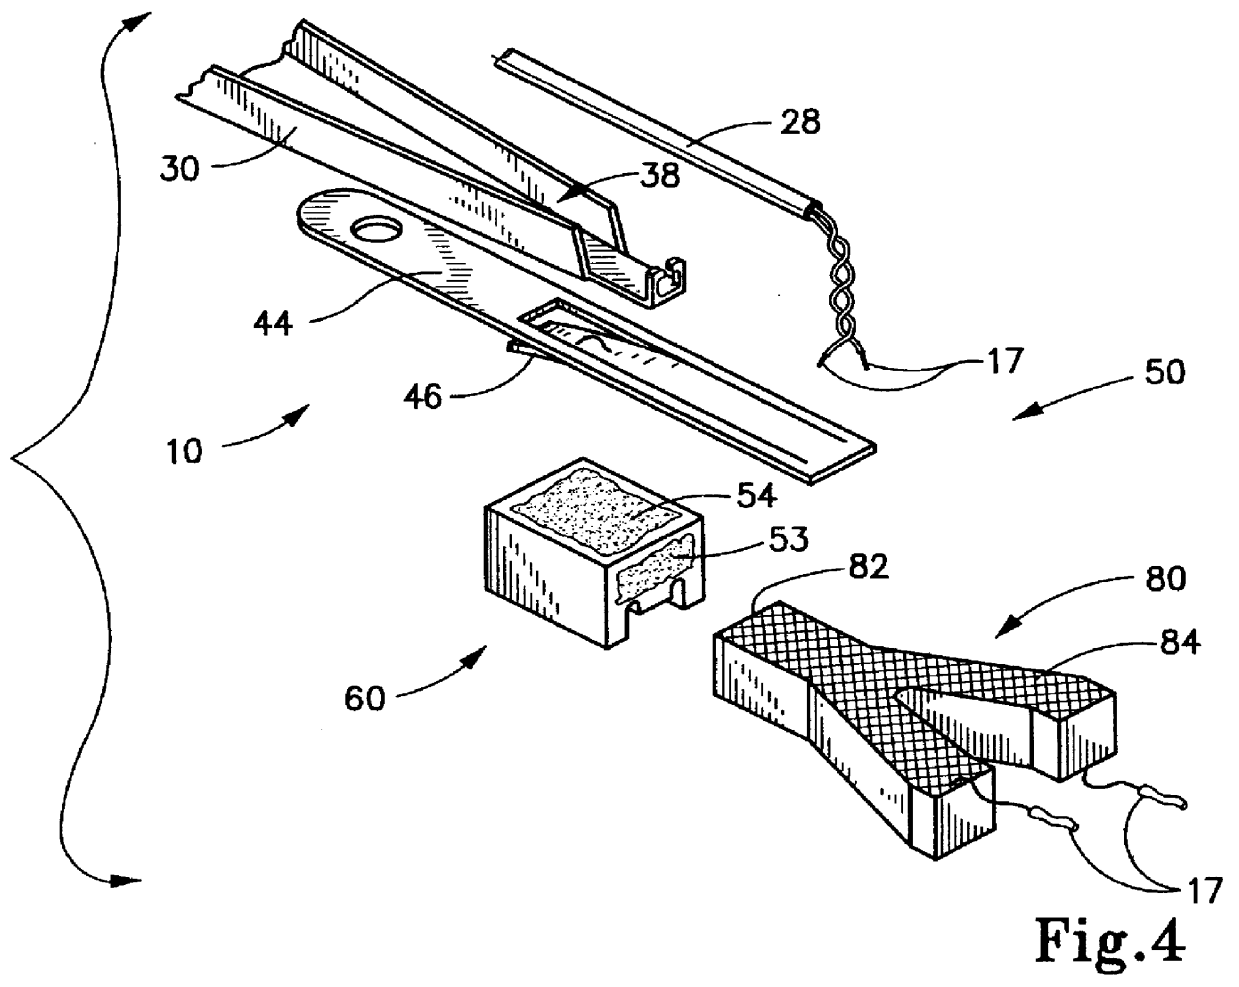 Methodology for fabricating sliders for use in glide head devices